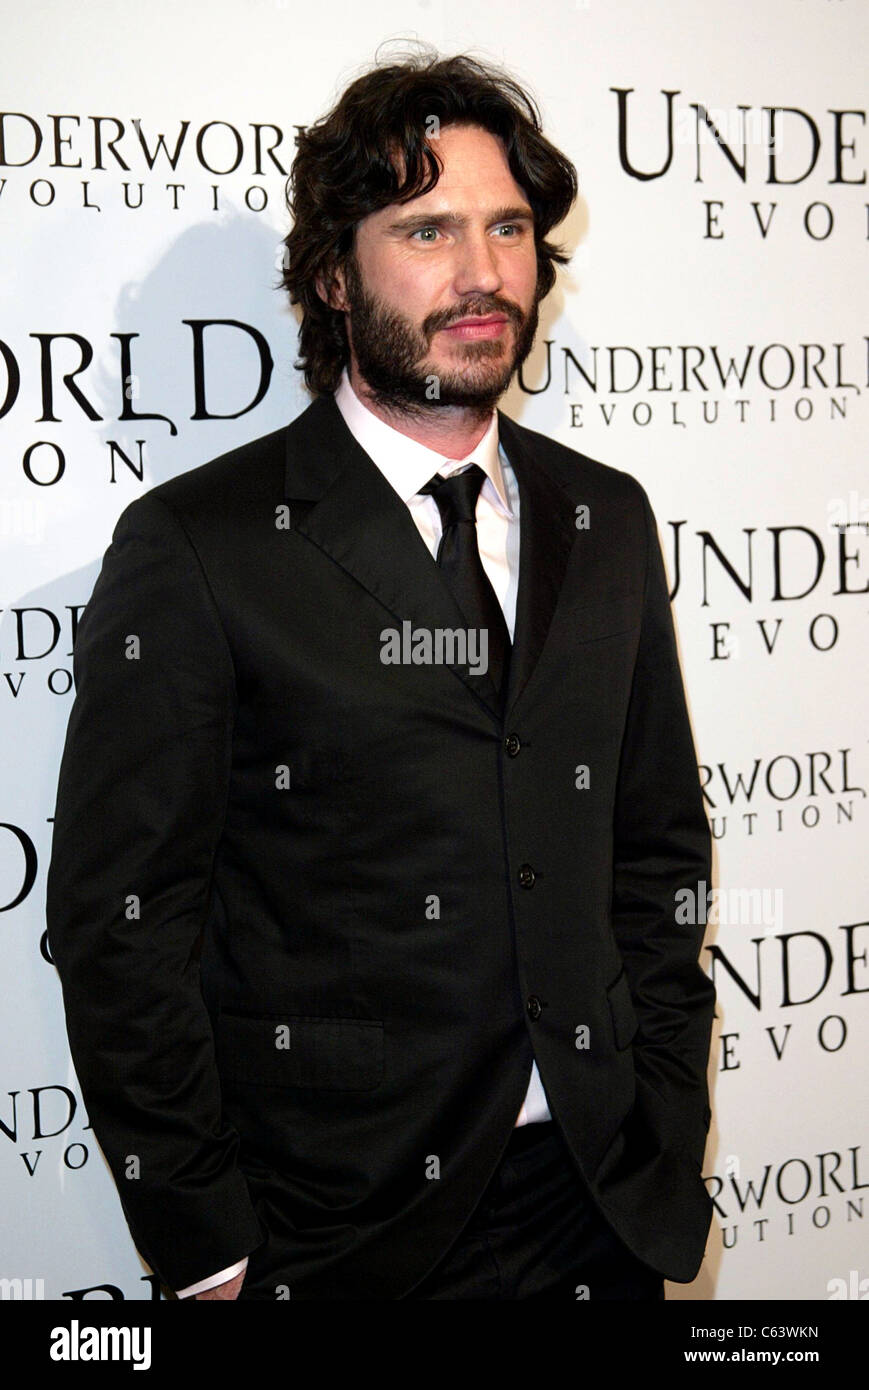 Shane Brolly at arrivals for UNDERWORLD EVOLUTION Premiere, Cinerama Dome at Arclight Cinemas, Los Angeles, CA, January 11, 2006. Photo by: Jeremy Montemagni/Everett Collection Stock Photo